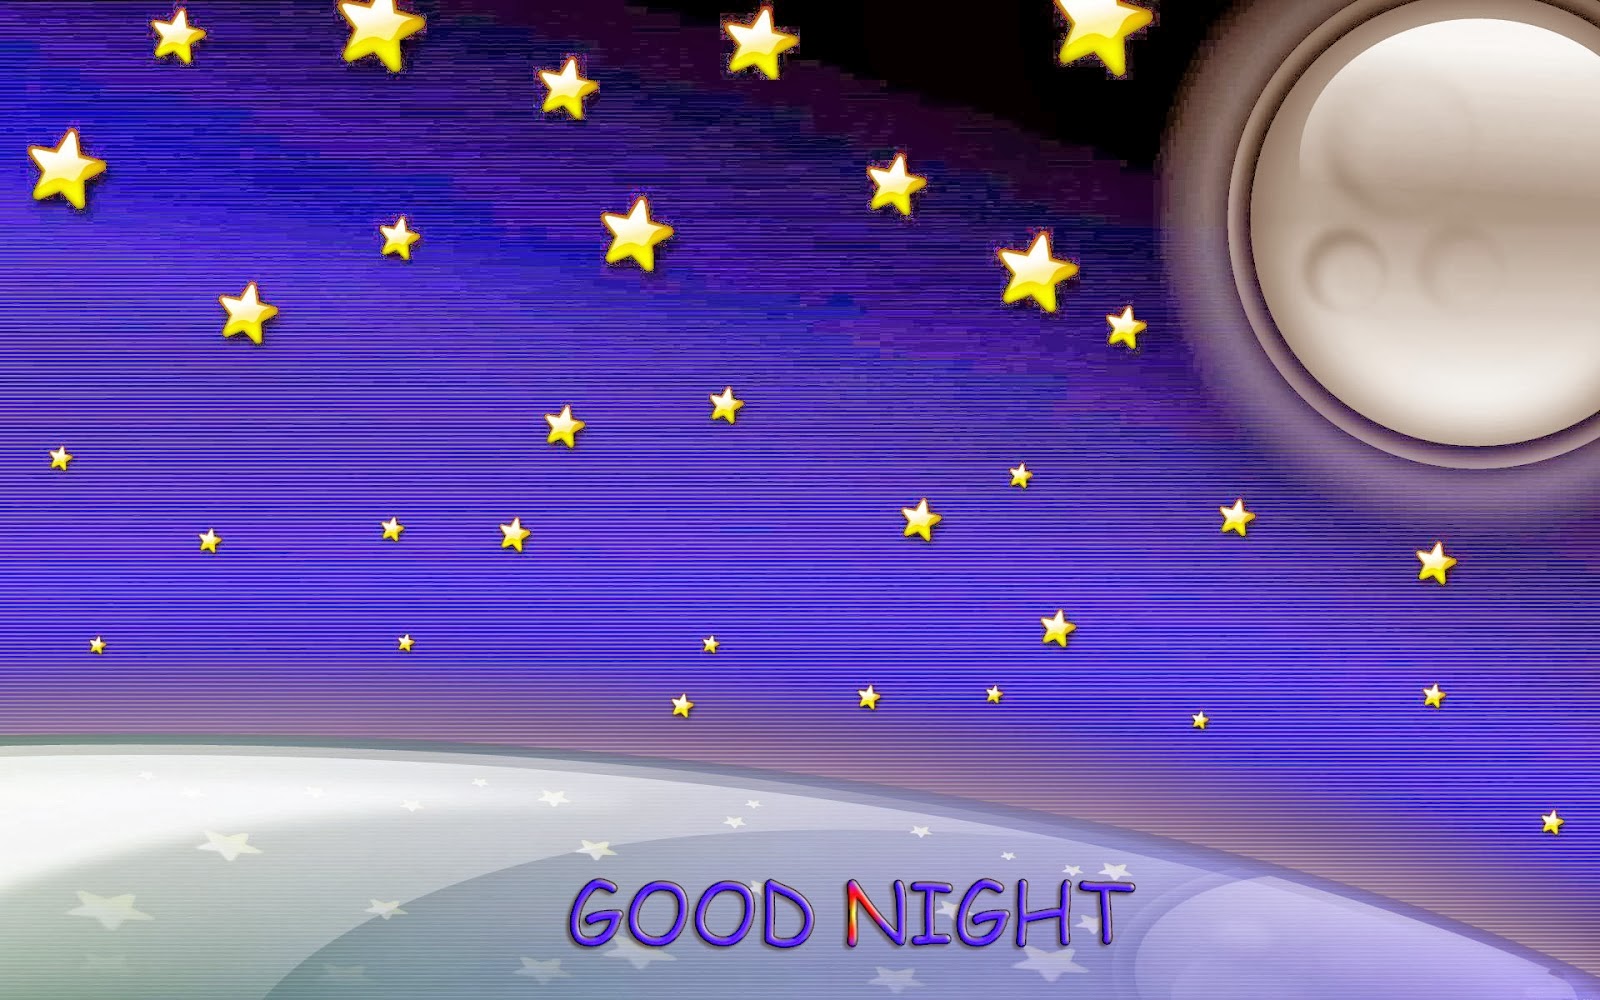 Free download Good Night HD Wallpapers Download Unique Wallpapers